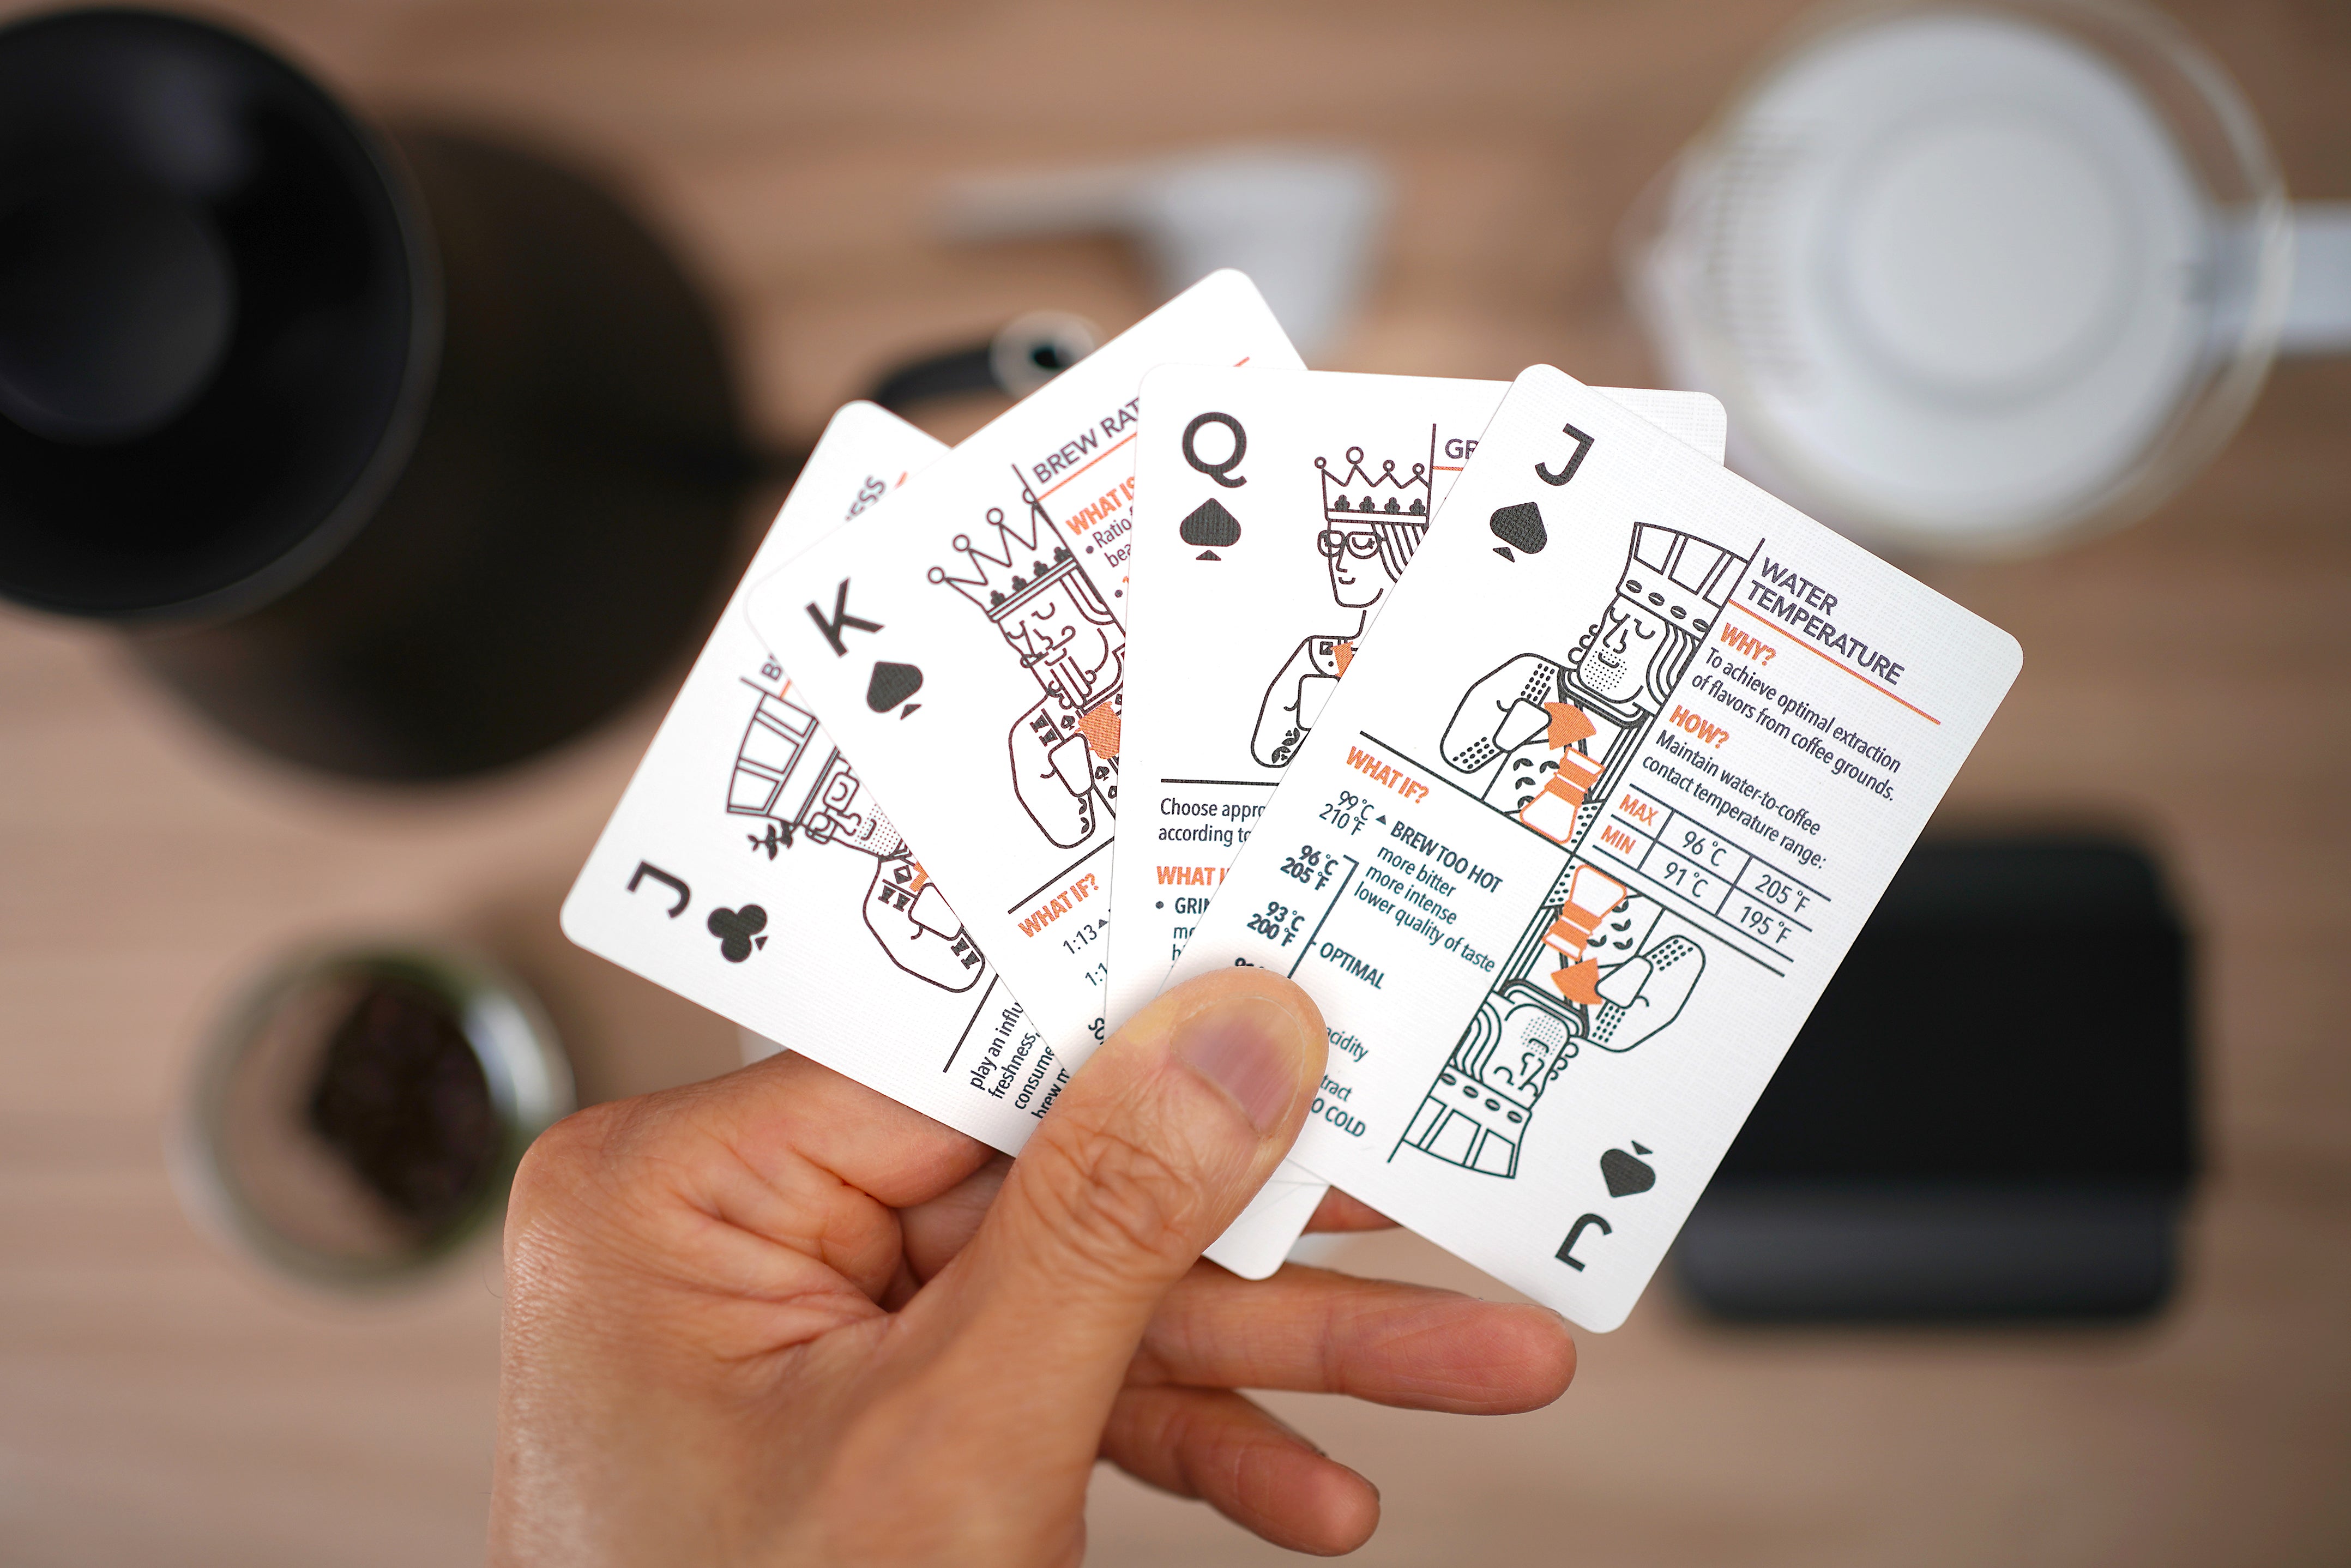 Useful coffee information in a deck of playing cards